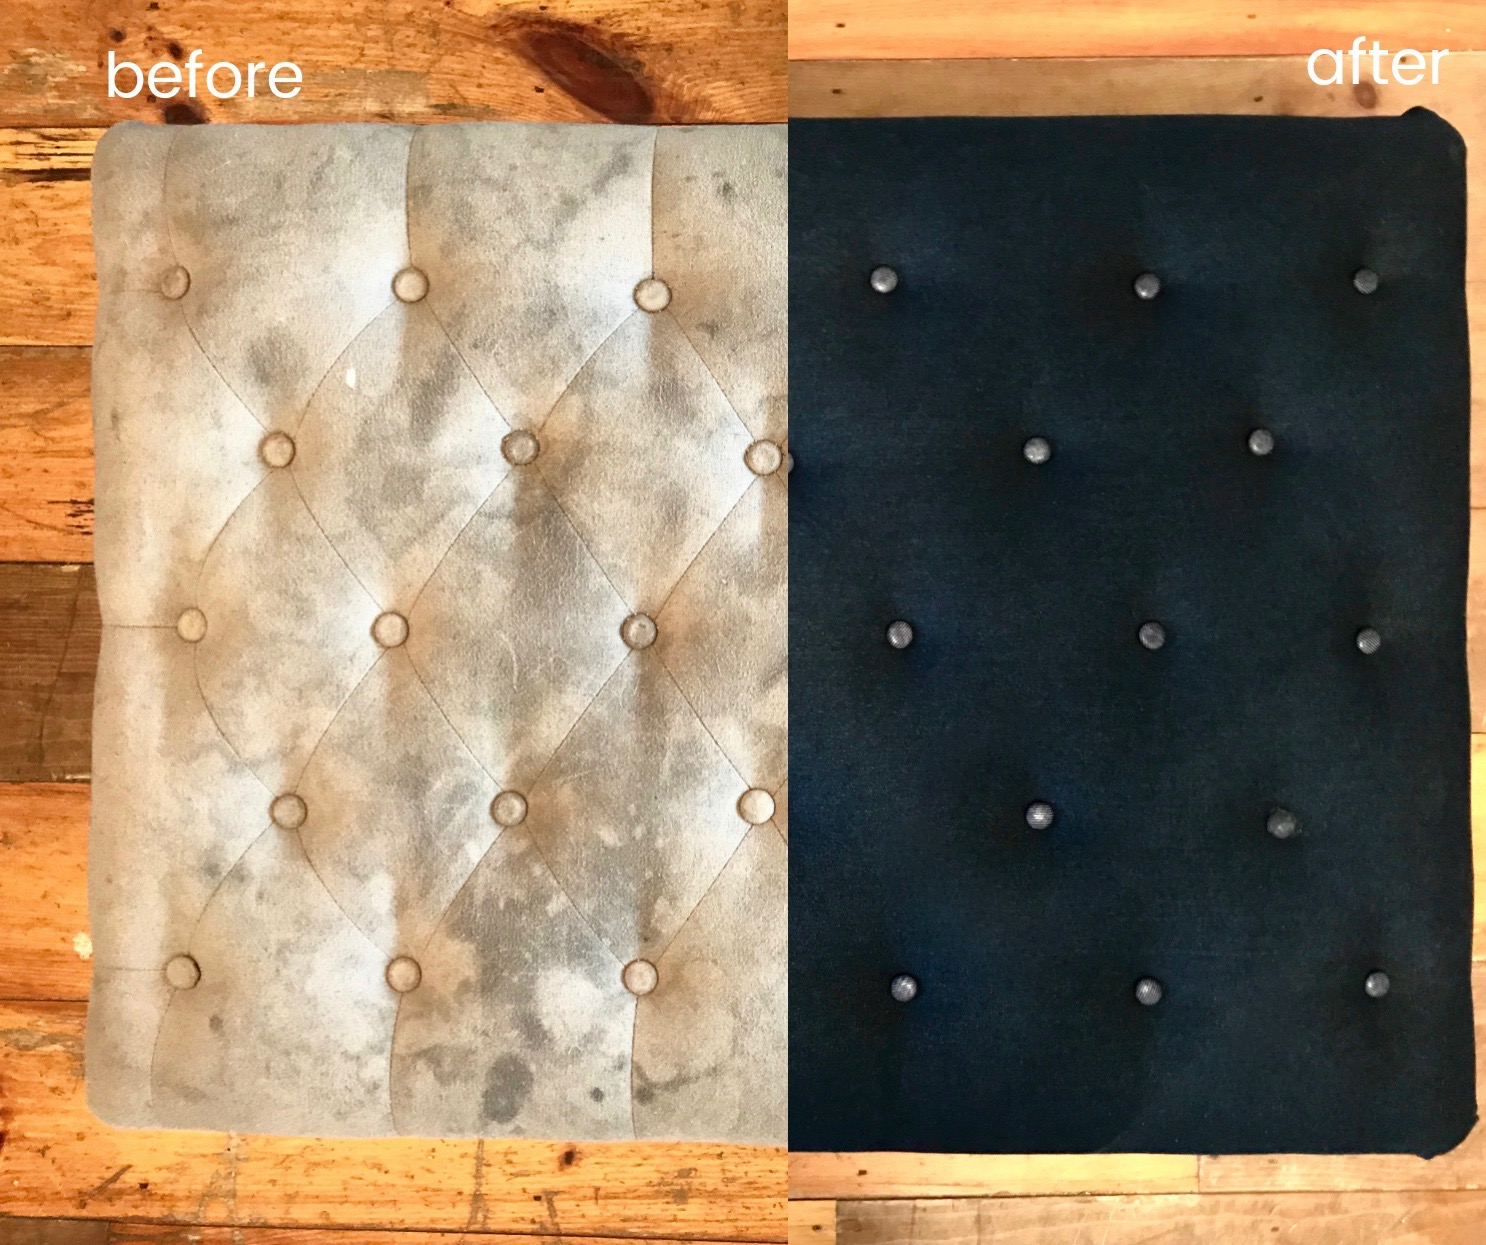 Ottoman before after upholstery denim THeresa MyFixitUpLife top view (1)